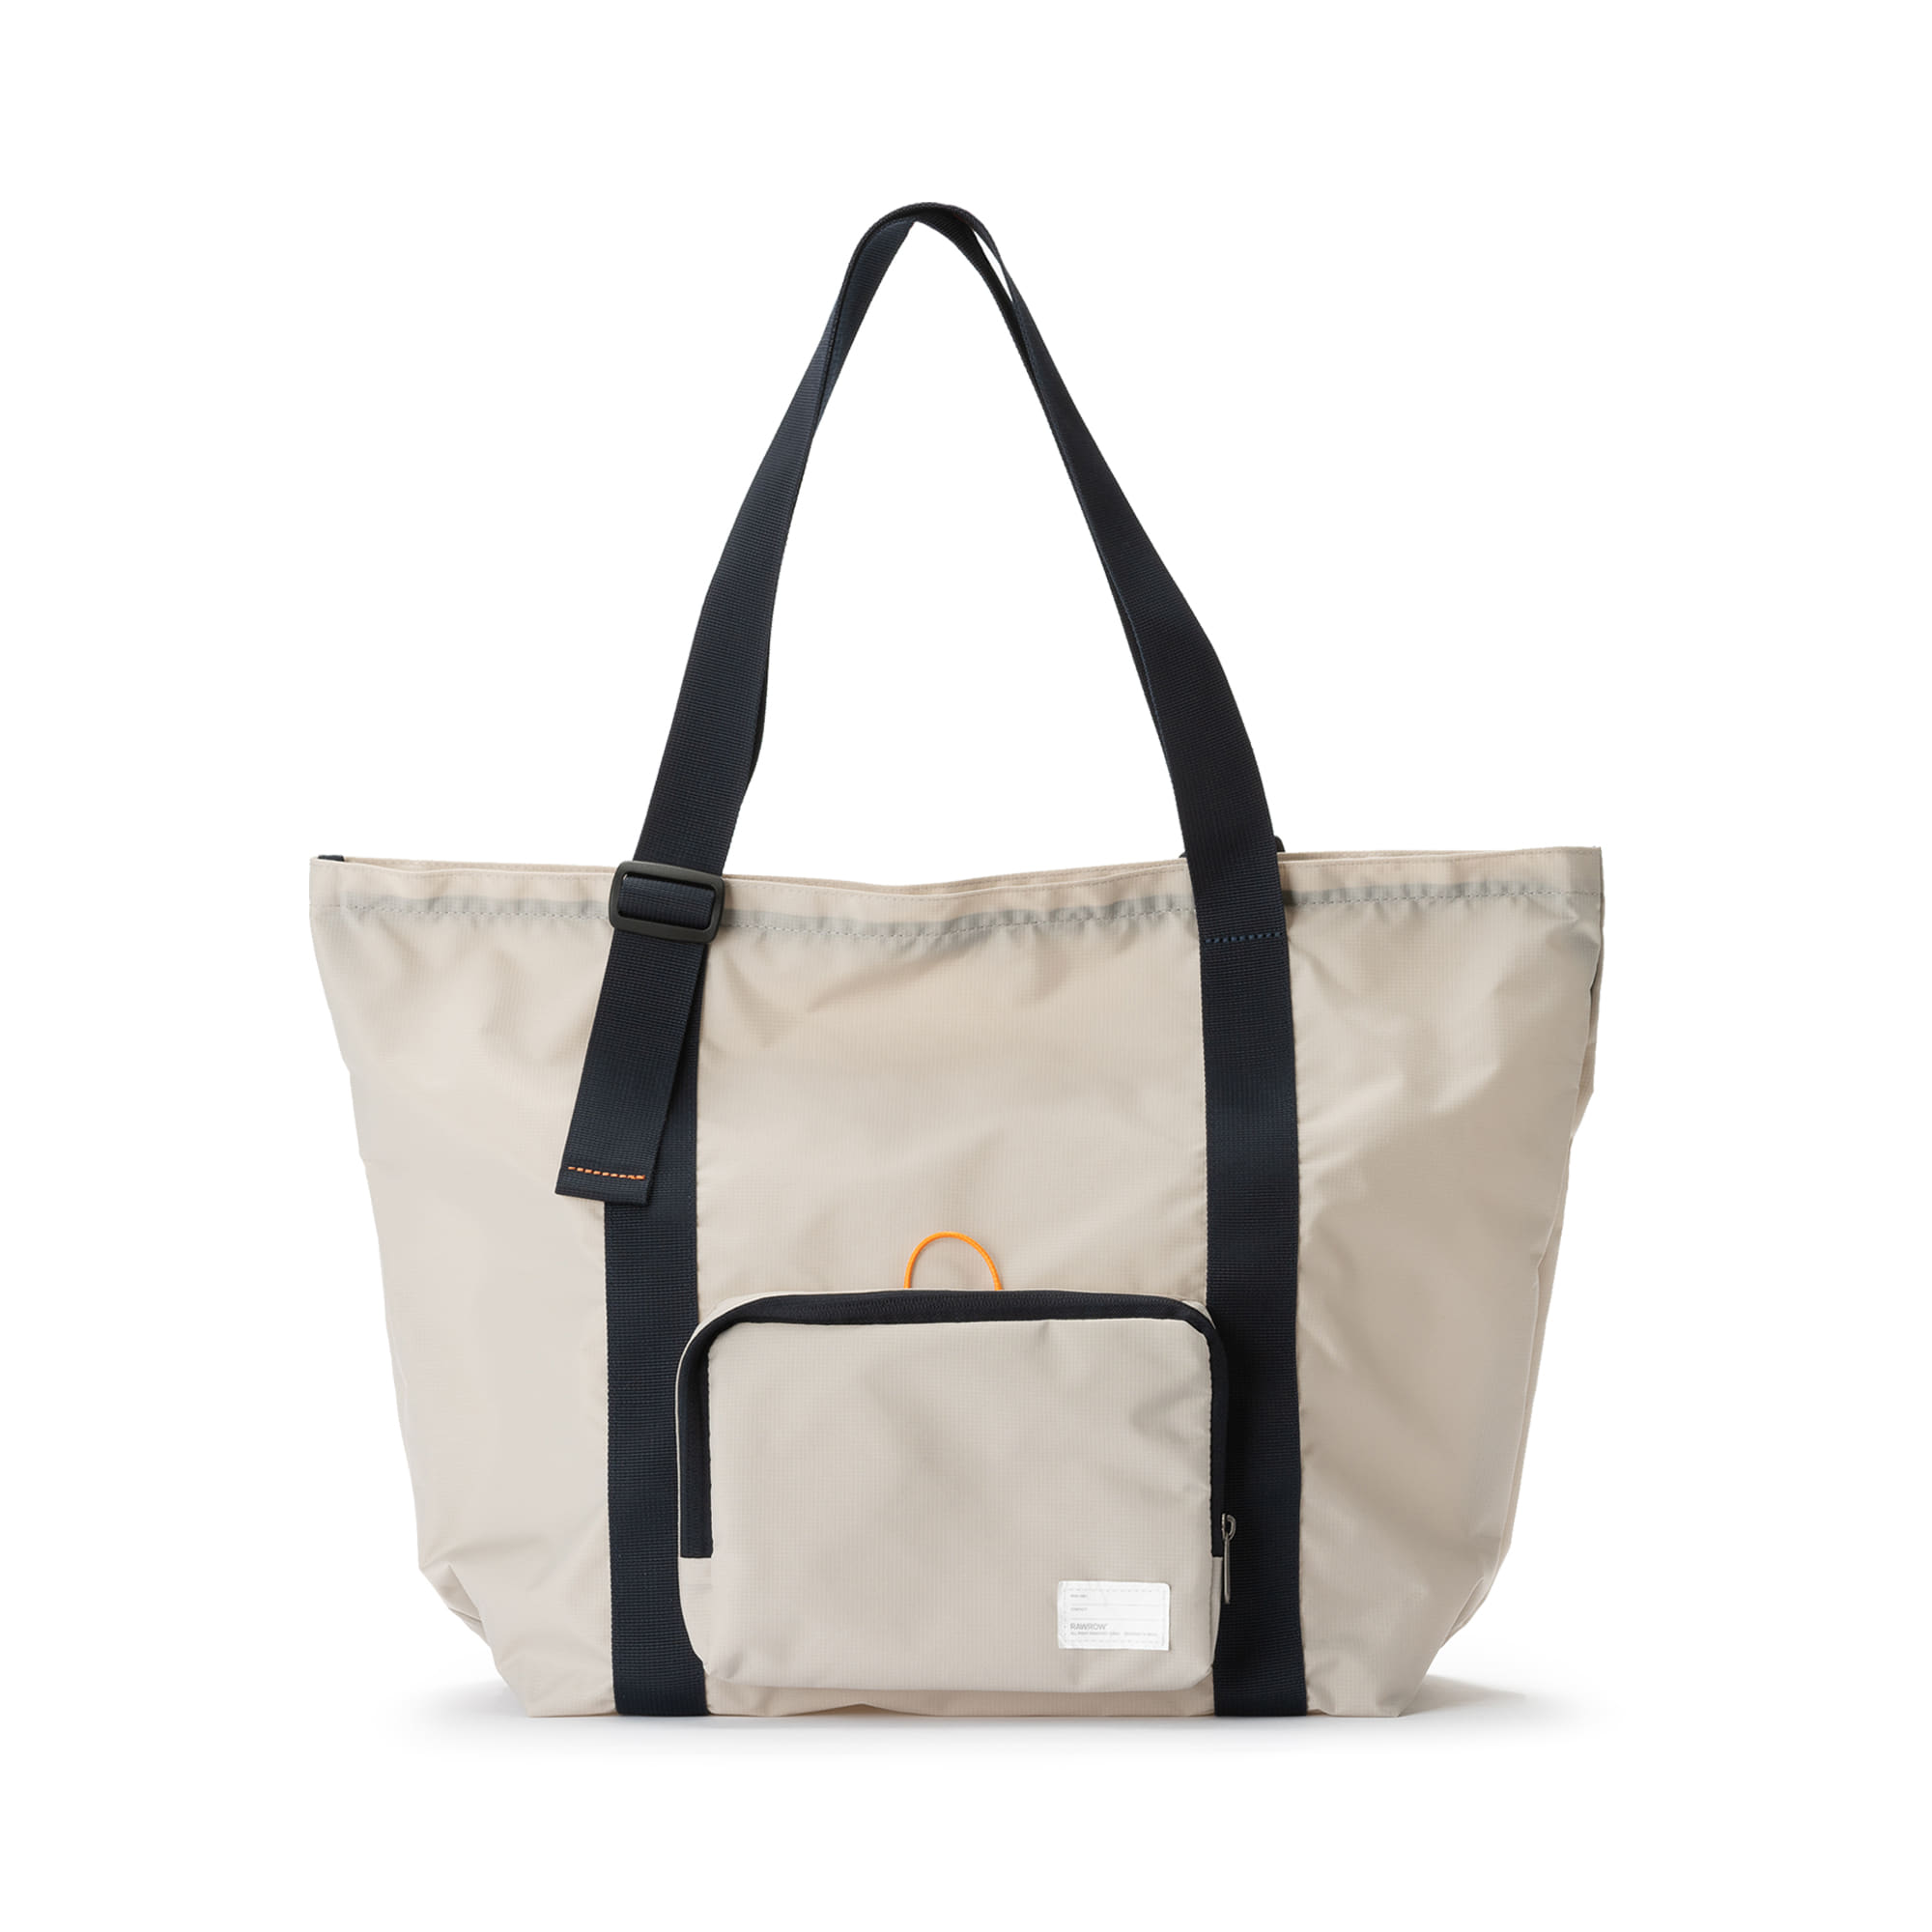 R PACKABLE TOTE 506 GRAY